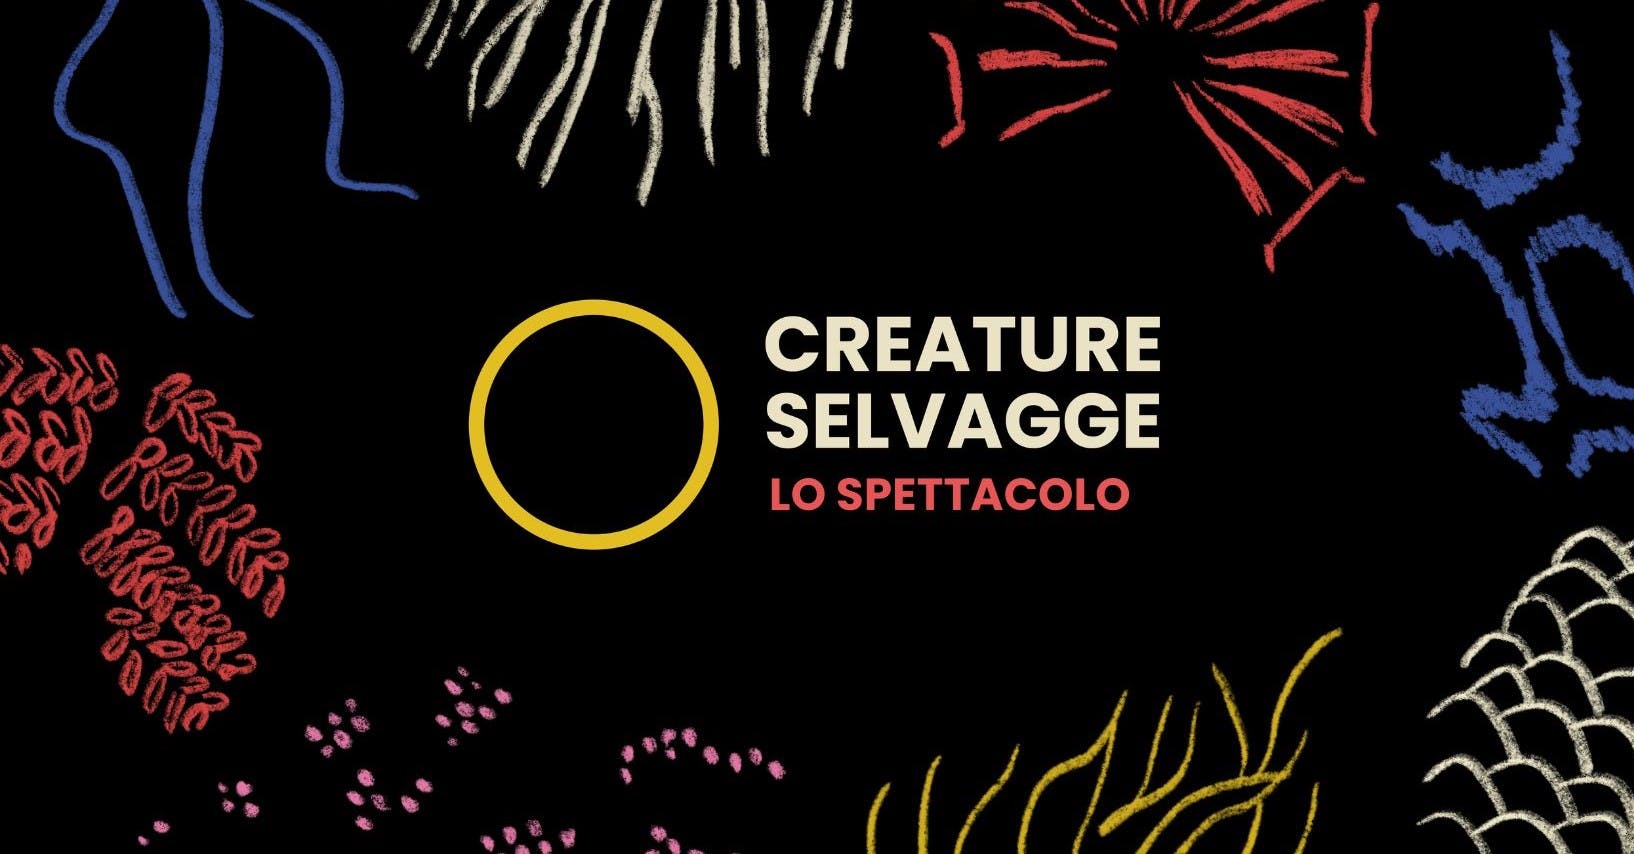 Creature Selvagge graphics on a black background with writing in the centre and colourful designs around